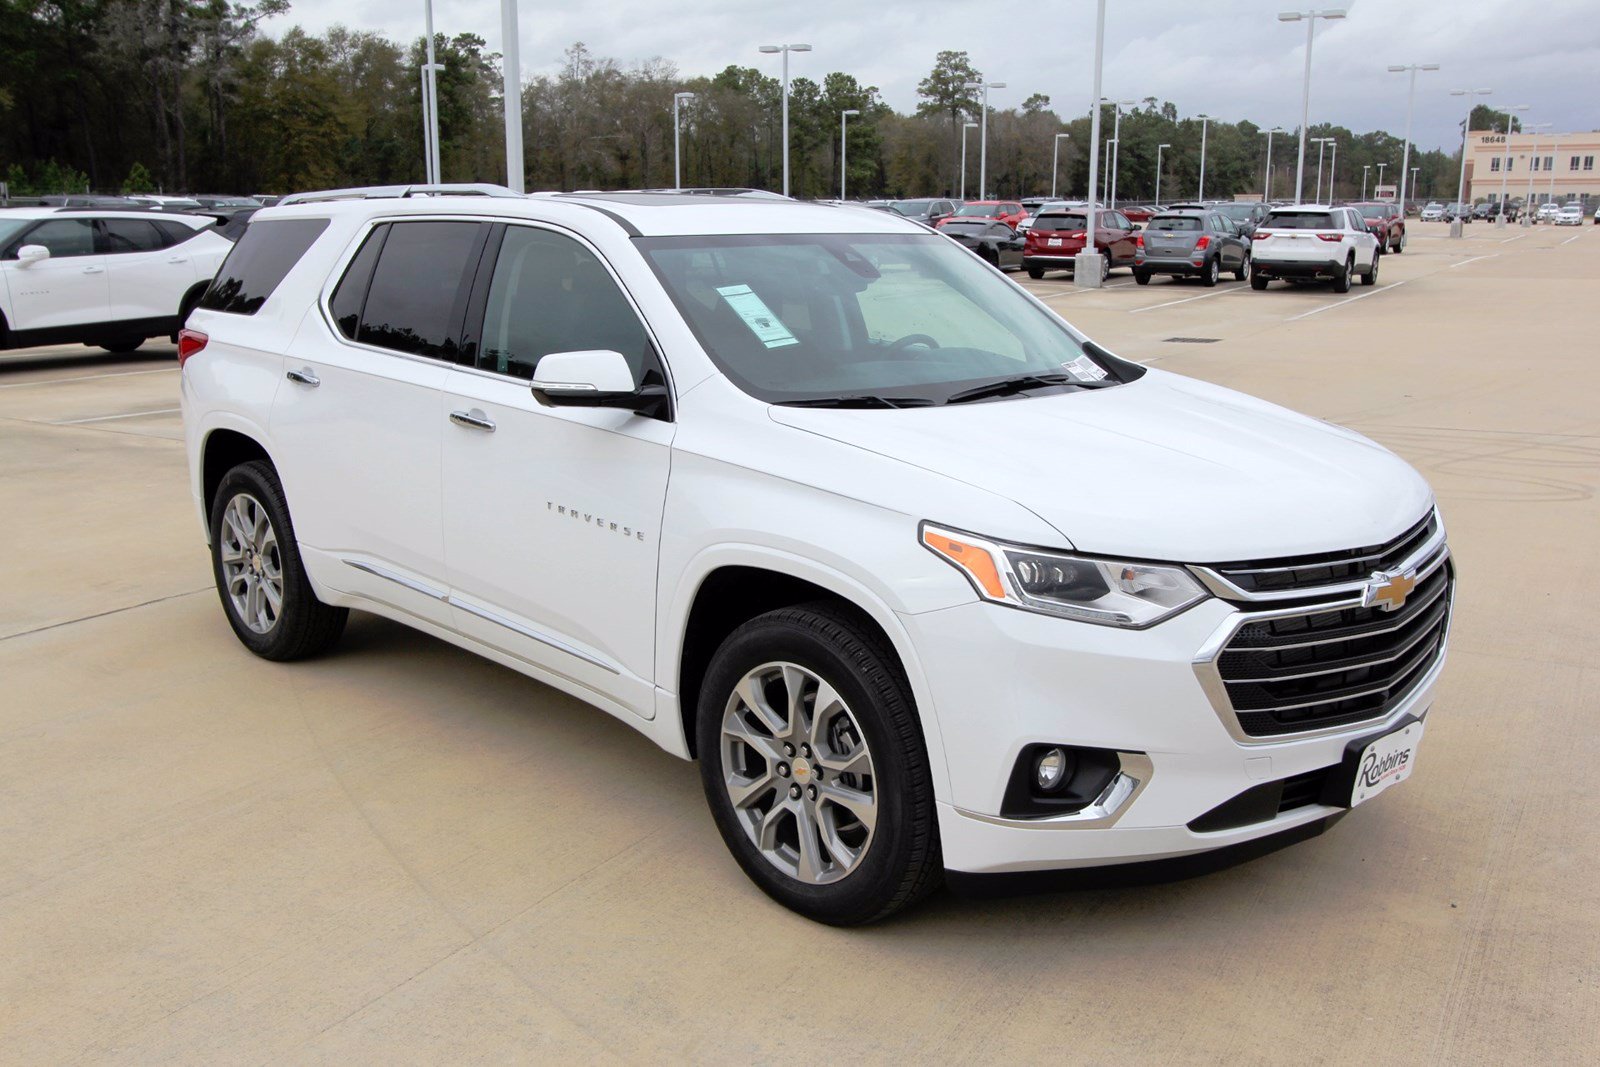 New 2020 Chevrolet Traverse Premier Sport Utility in Humble #02060598